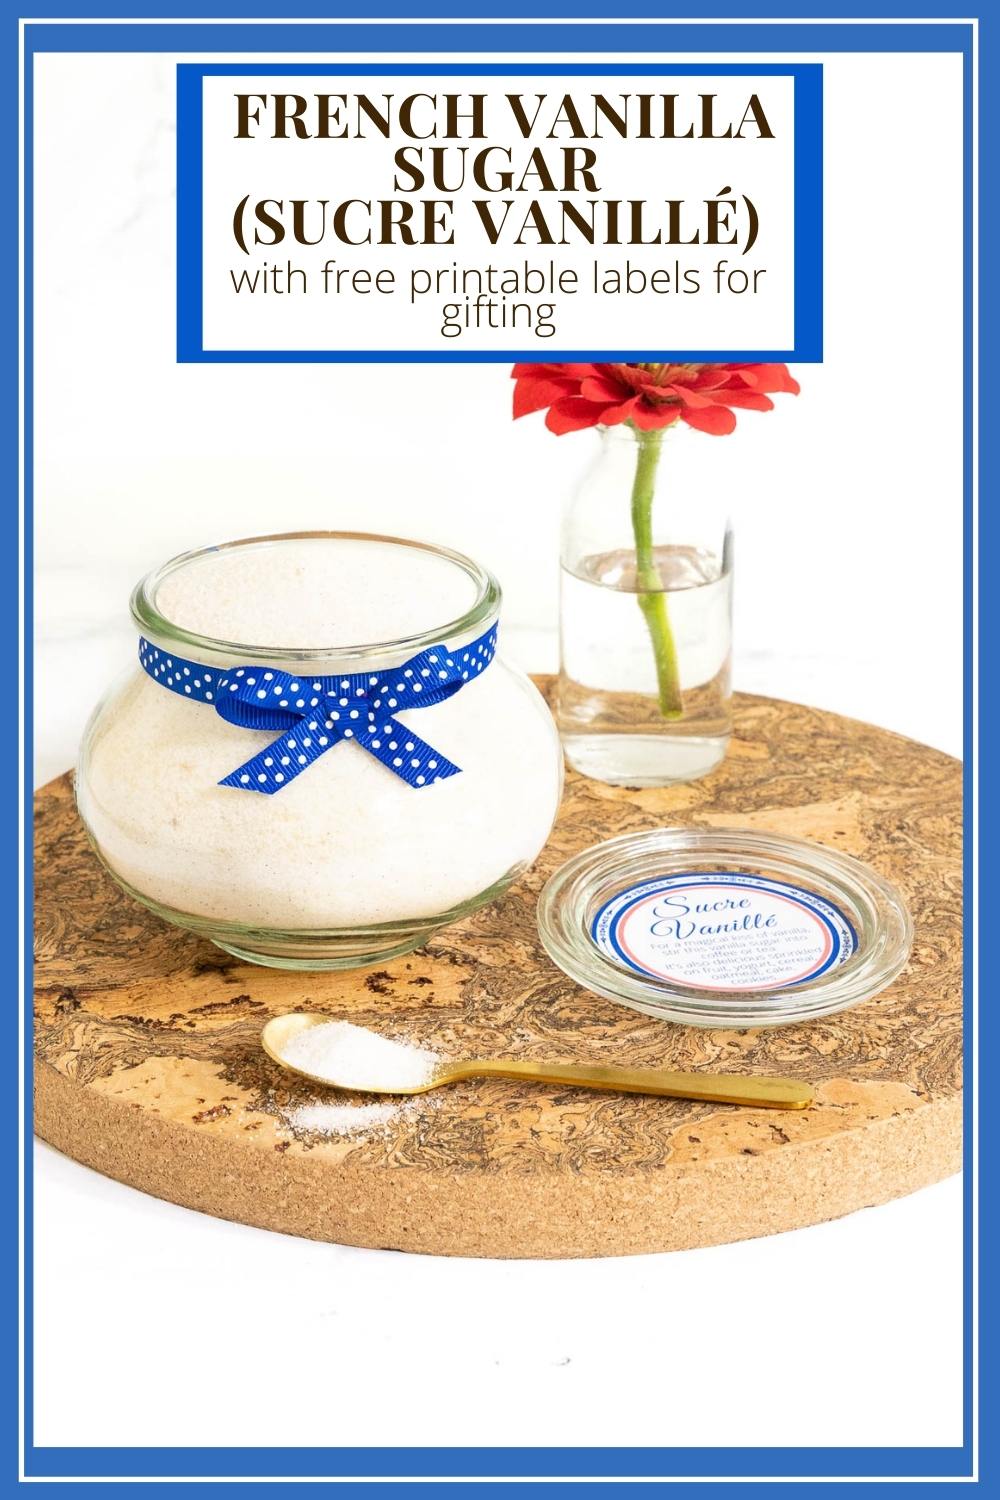 French Vanilla Sugar (Sucre Vanillé) with free printable labels for gifting